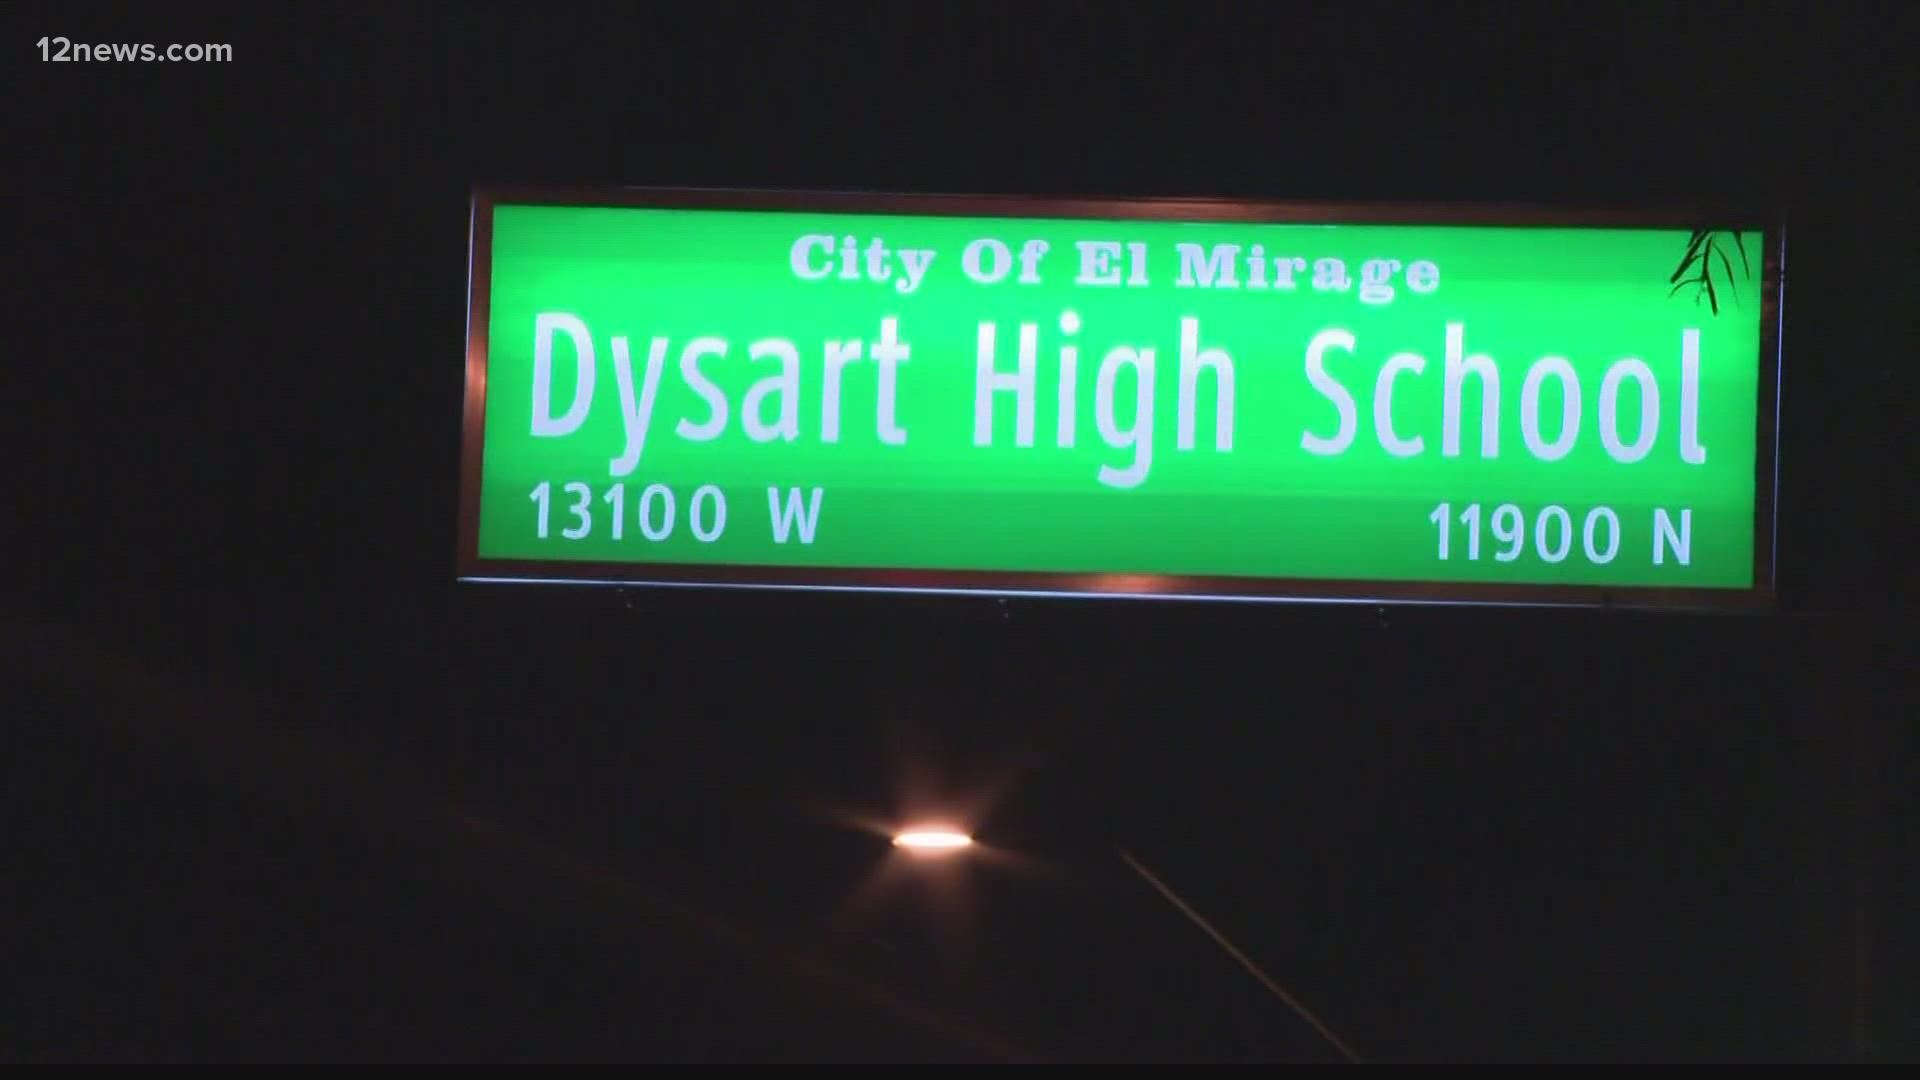 Police said the security guard and assistant football coach is suspected of having sex with a 16-year-old student at Dysart High School.